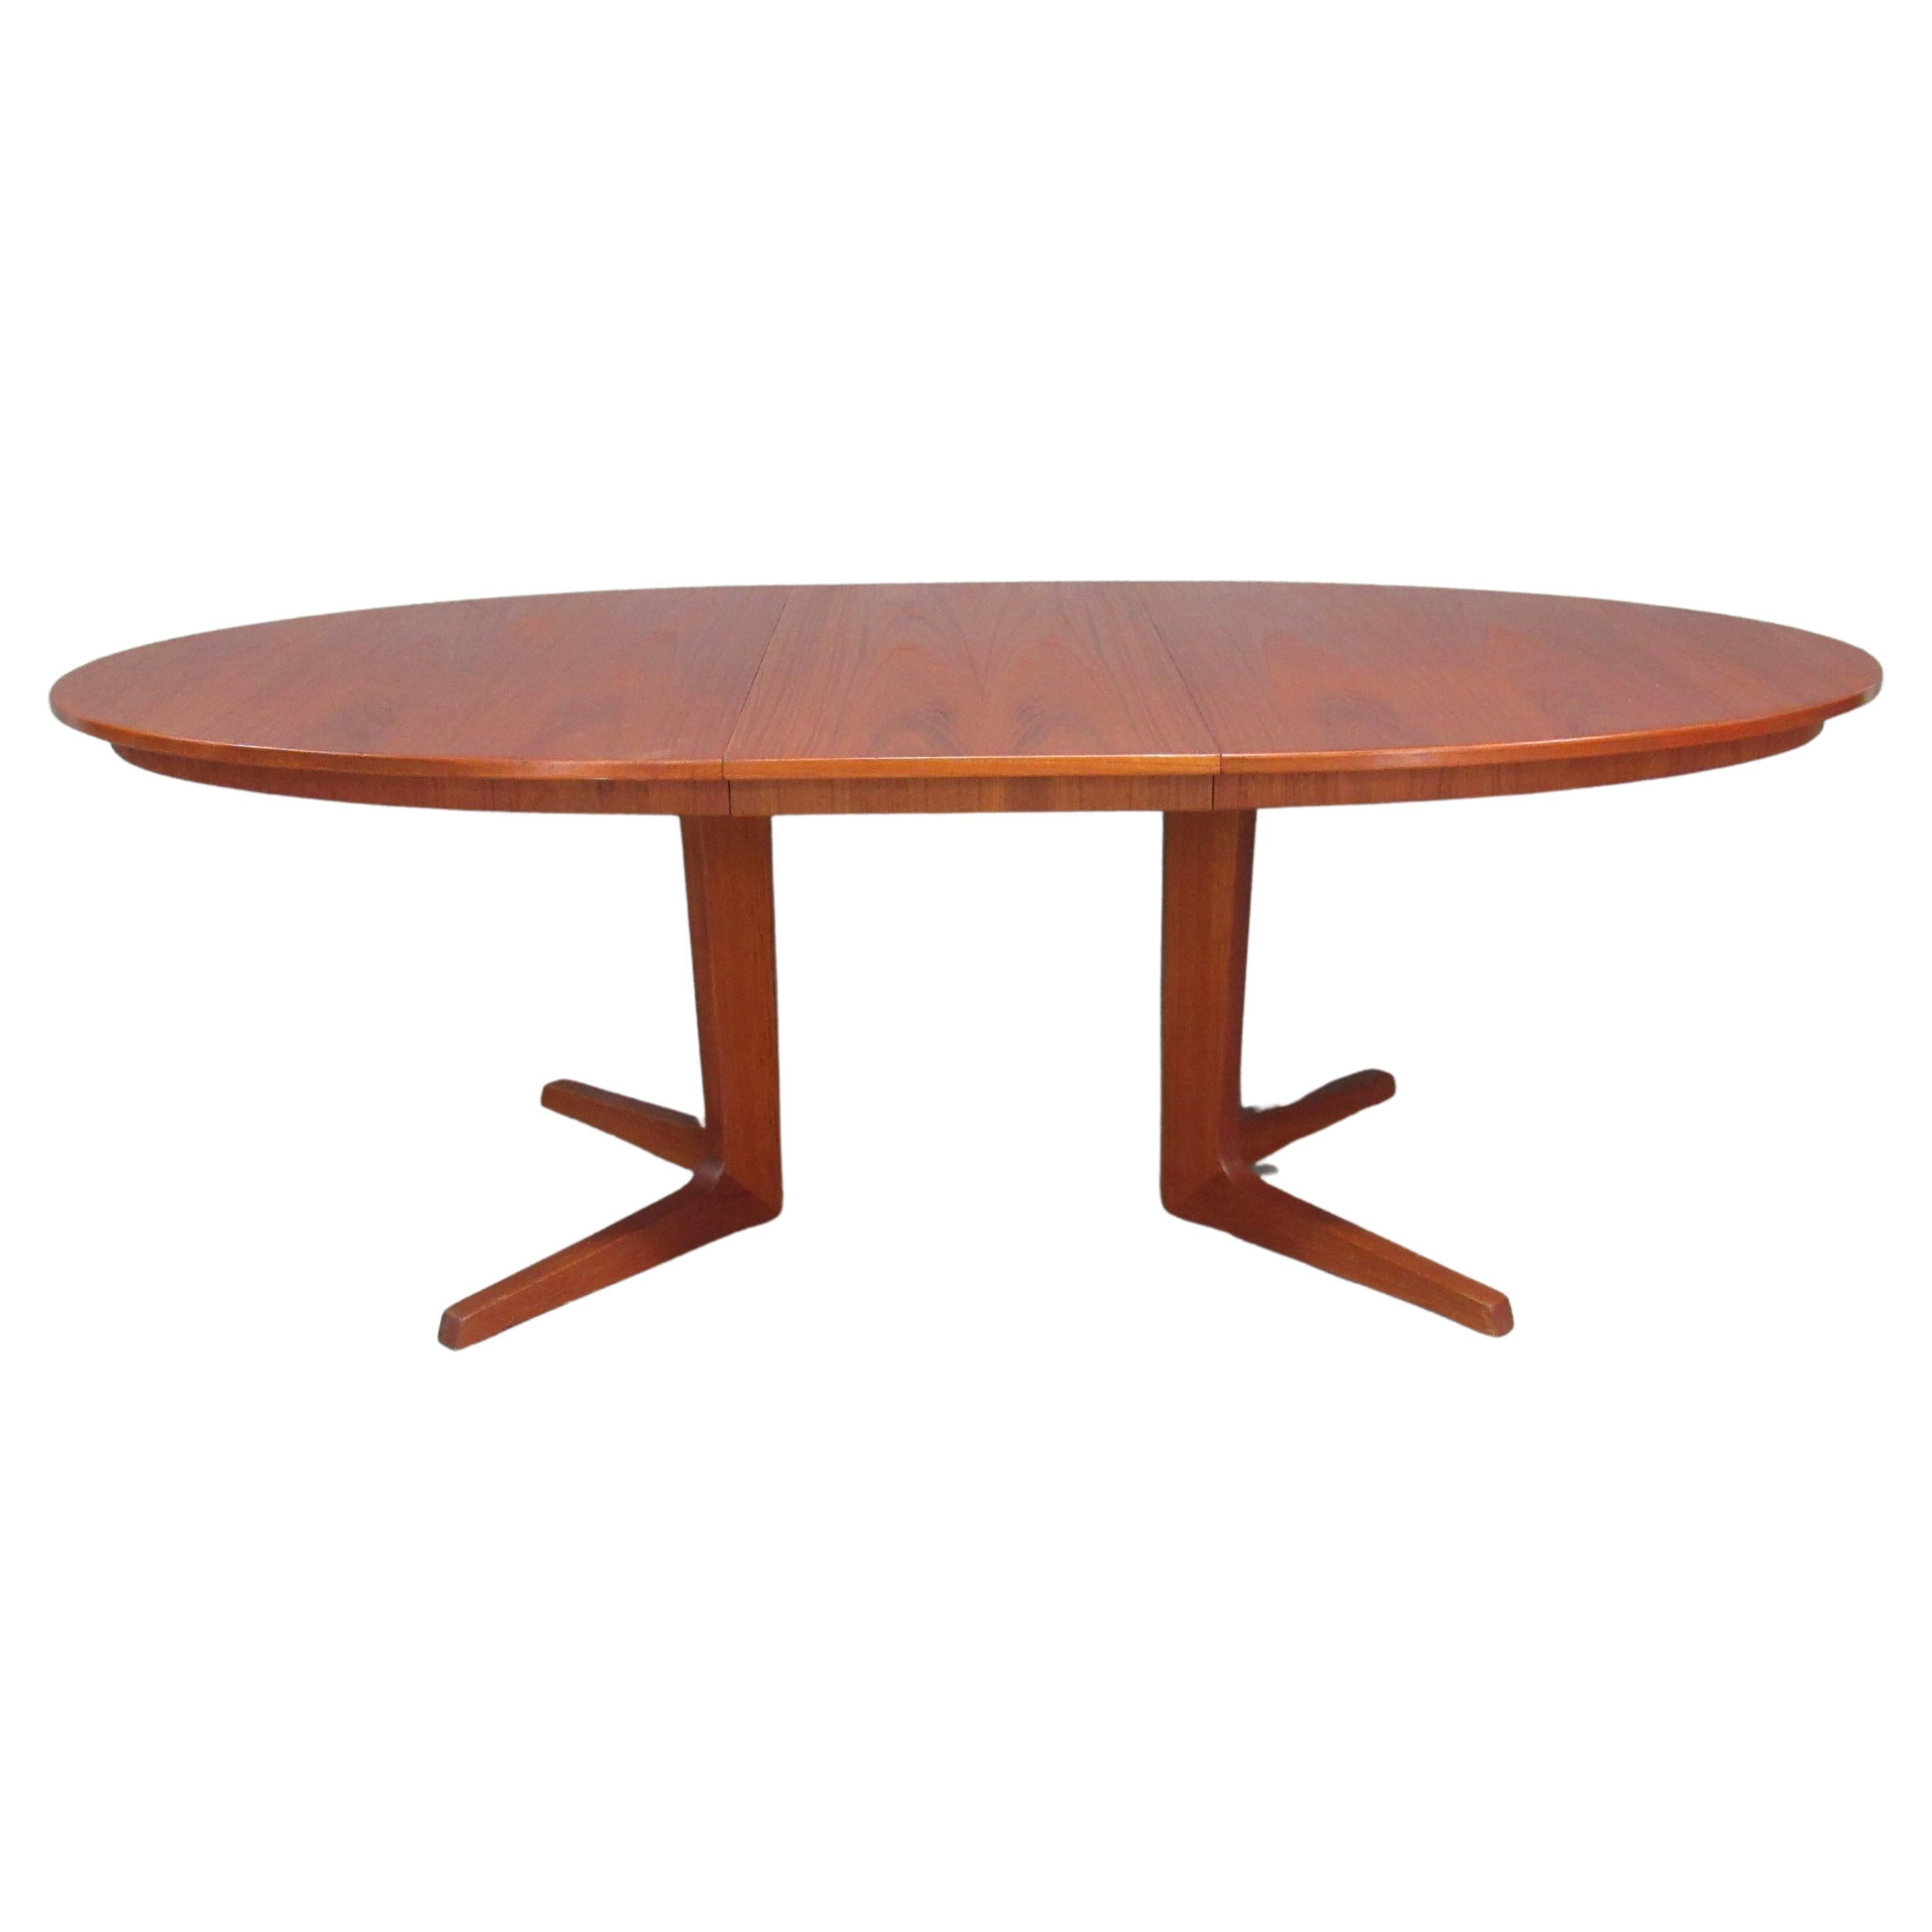 Mid-Century Danish Modern Teak Extension Dining Table by Gudme, Circa 1970s